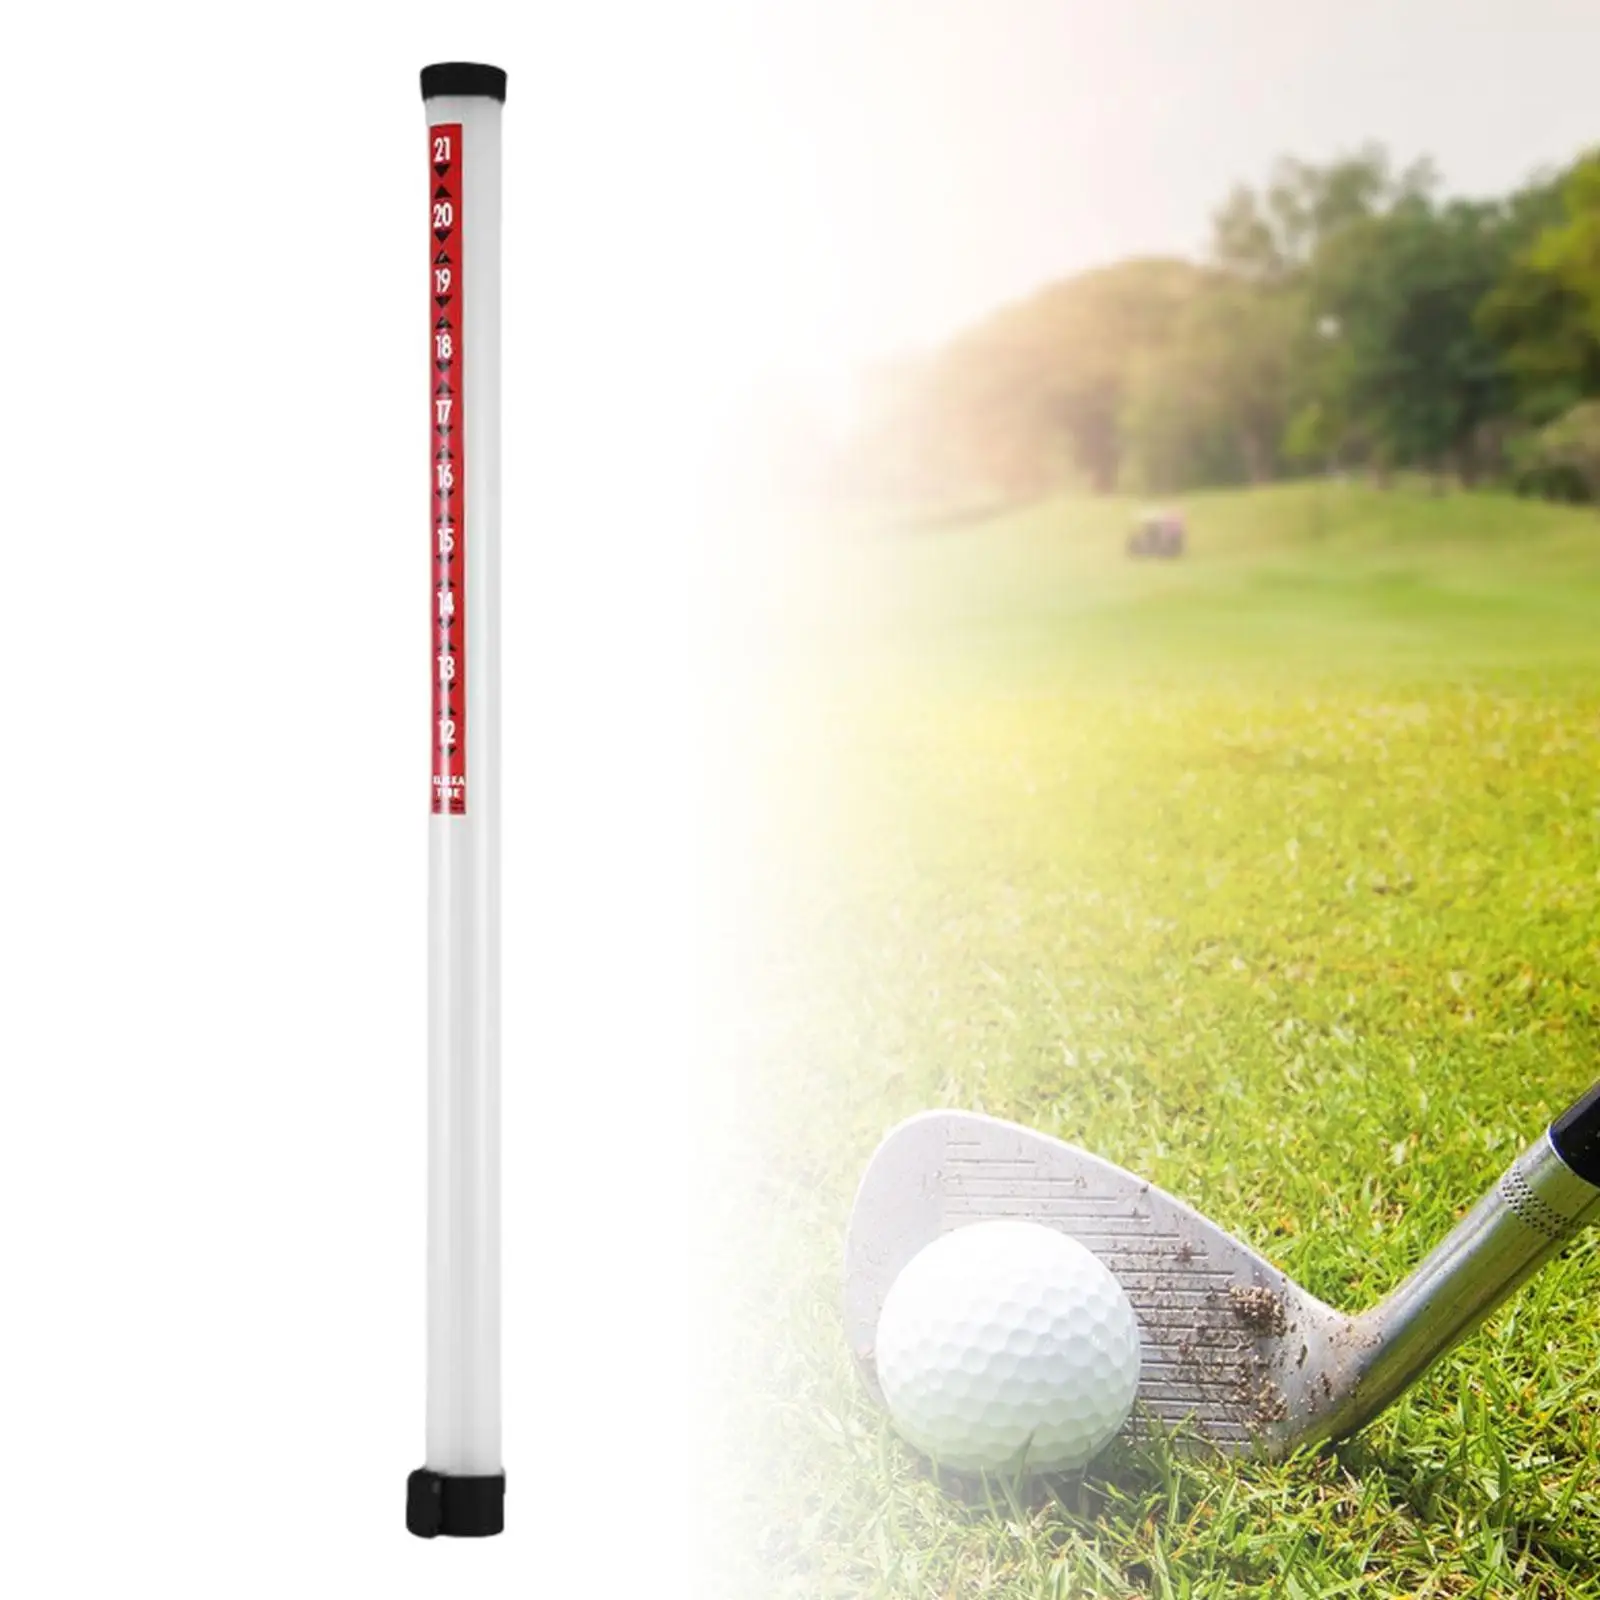 Golf Ball Retriever Pick up Sucker Tool with Foot Release Golf Accessories Golf Ball Shag Tube for Men Women Practice Training